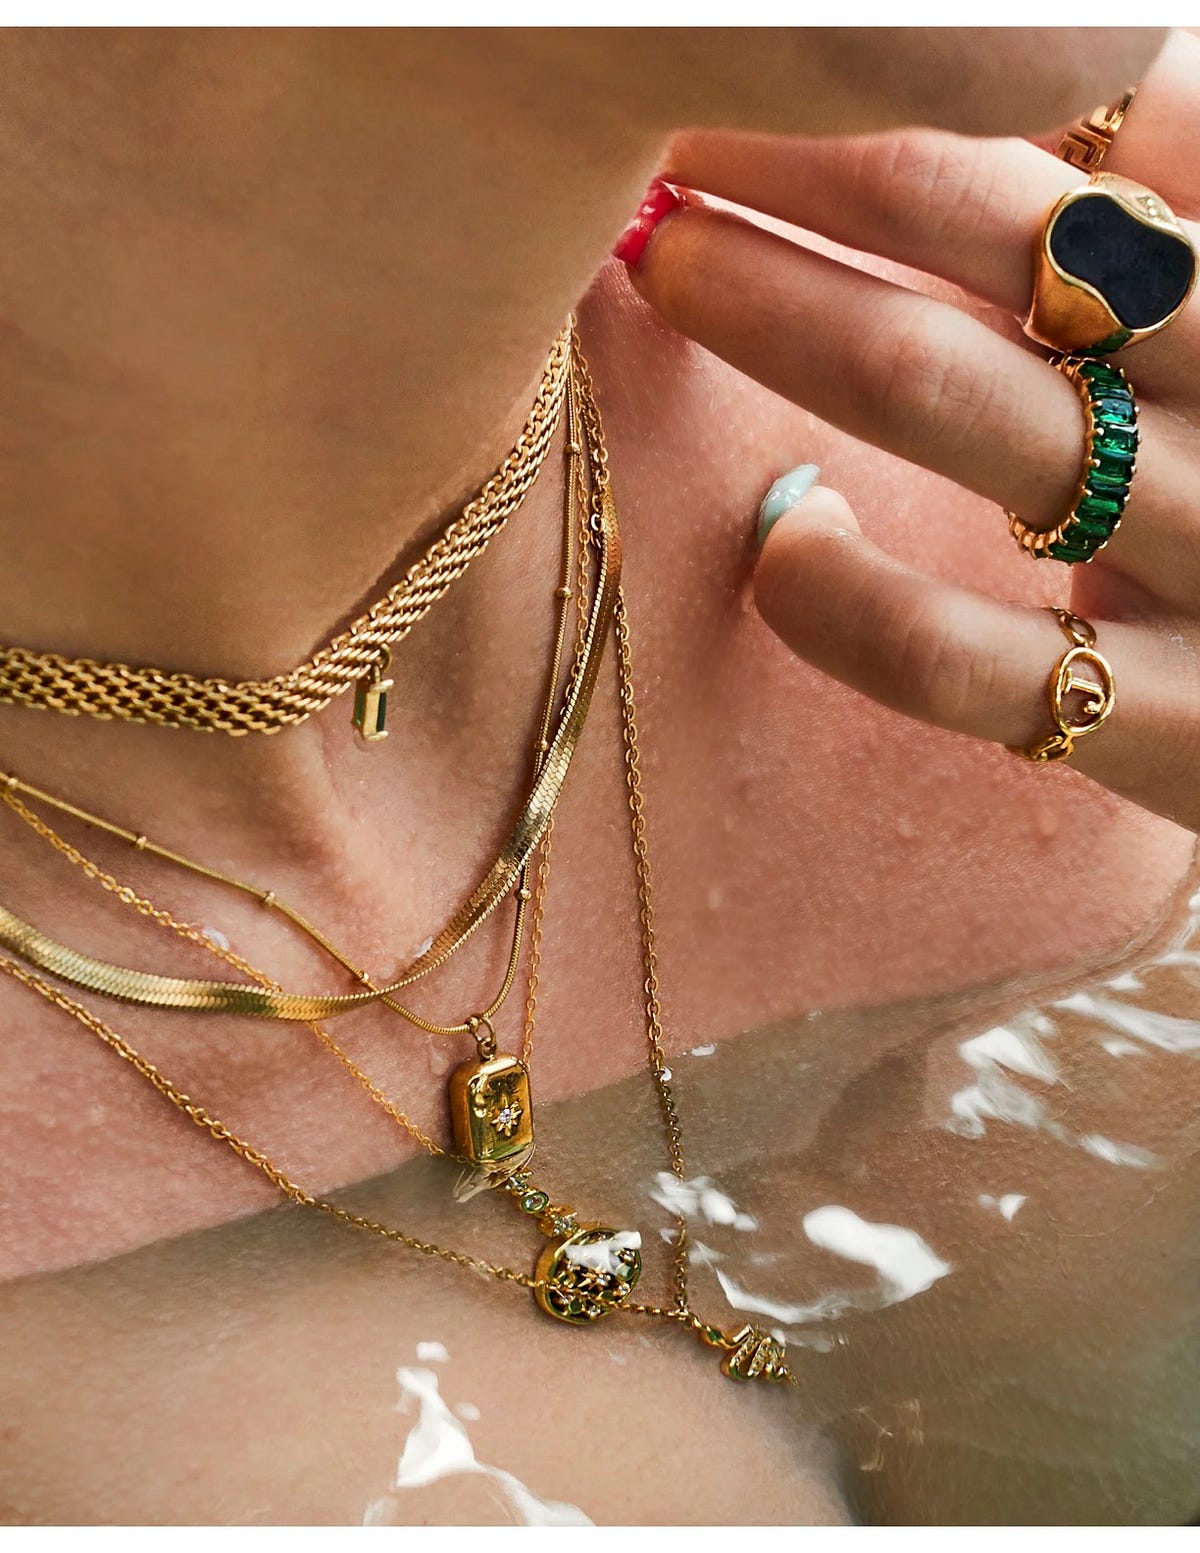 Top 5 Clean Girl Aesthetic Jewelry Trends of 2023, by Coco Colarik